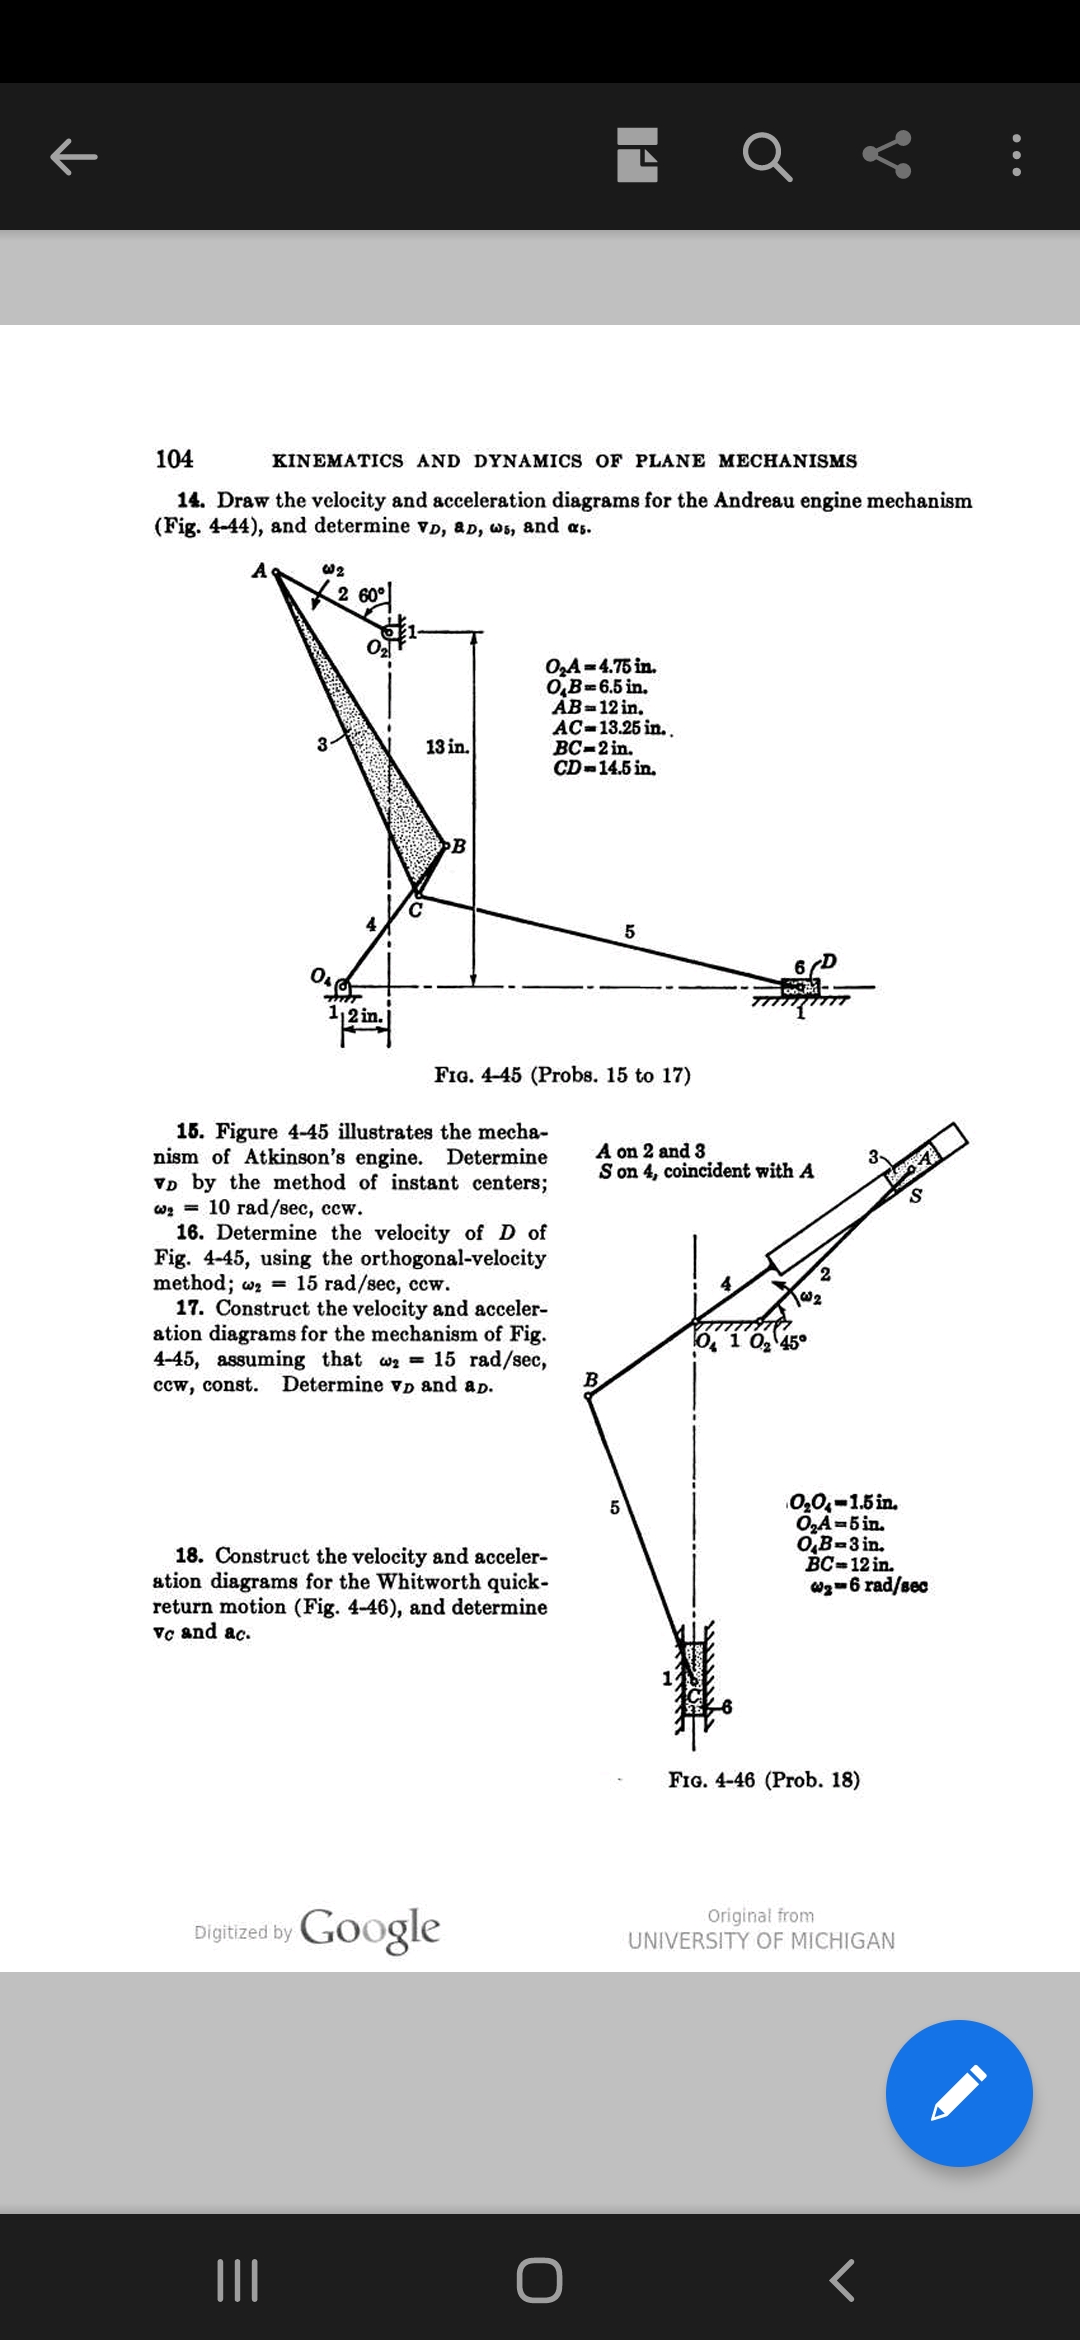 104
KINEMATICS AND DYNAMICS OF PLANE MECHANISMS
14. Draw the velocity and acceleration diagrams for the Andreau engine mechanism
(Fig. 4-44), and determine vD, aD, ws, and as.
A
w2
2 60°
O,A=4.75 in.
O,B=6.5 in.
AB=12 in.
AC-13.25 in. .
ВС-2 in.
CD-14.5 in.
13 in.
B
5
6D
12 in.
FIG. 4-45 (Probs. 15 to 17)
15. Figure 4-45 illustrates the mecha-
nism of Atkinson's engine. Determine
VD by the method of instant centers;
оз 3 10 гаd/sec, ссw.
16. Determine the velocity of D of
Fig. 4-45, using the orthogonal-velocity
method; wz = 15 rad/sec, ccw.
17. Construct the velocity and acceler-
ation diagrams for the mechanism of Fig.
4-45, assuming that wa 15 rad/sec,
ccw, const.
A on 2 and 3
S on 4, coincident with A
2.
O, 1 0, 45°
Determine vD and ap.
18. Construct the velocity and acceler-
ation diagrams for the Whitworth quick-
return motion (Fig. 4-46), and determine
Vc and ac.
0,0,-1.5 in.
O,A-5 in.
0,B-3 in.
Вс-12 in.
Wg-6 rad/sec
FIG. 4-46 (Prob. 18)
Digitized by Google
Original from
UNIVERSITY OF MICHIGAN
